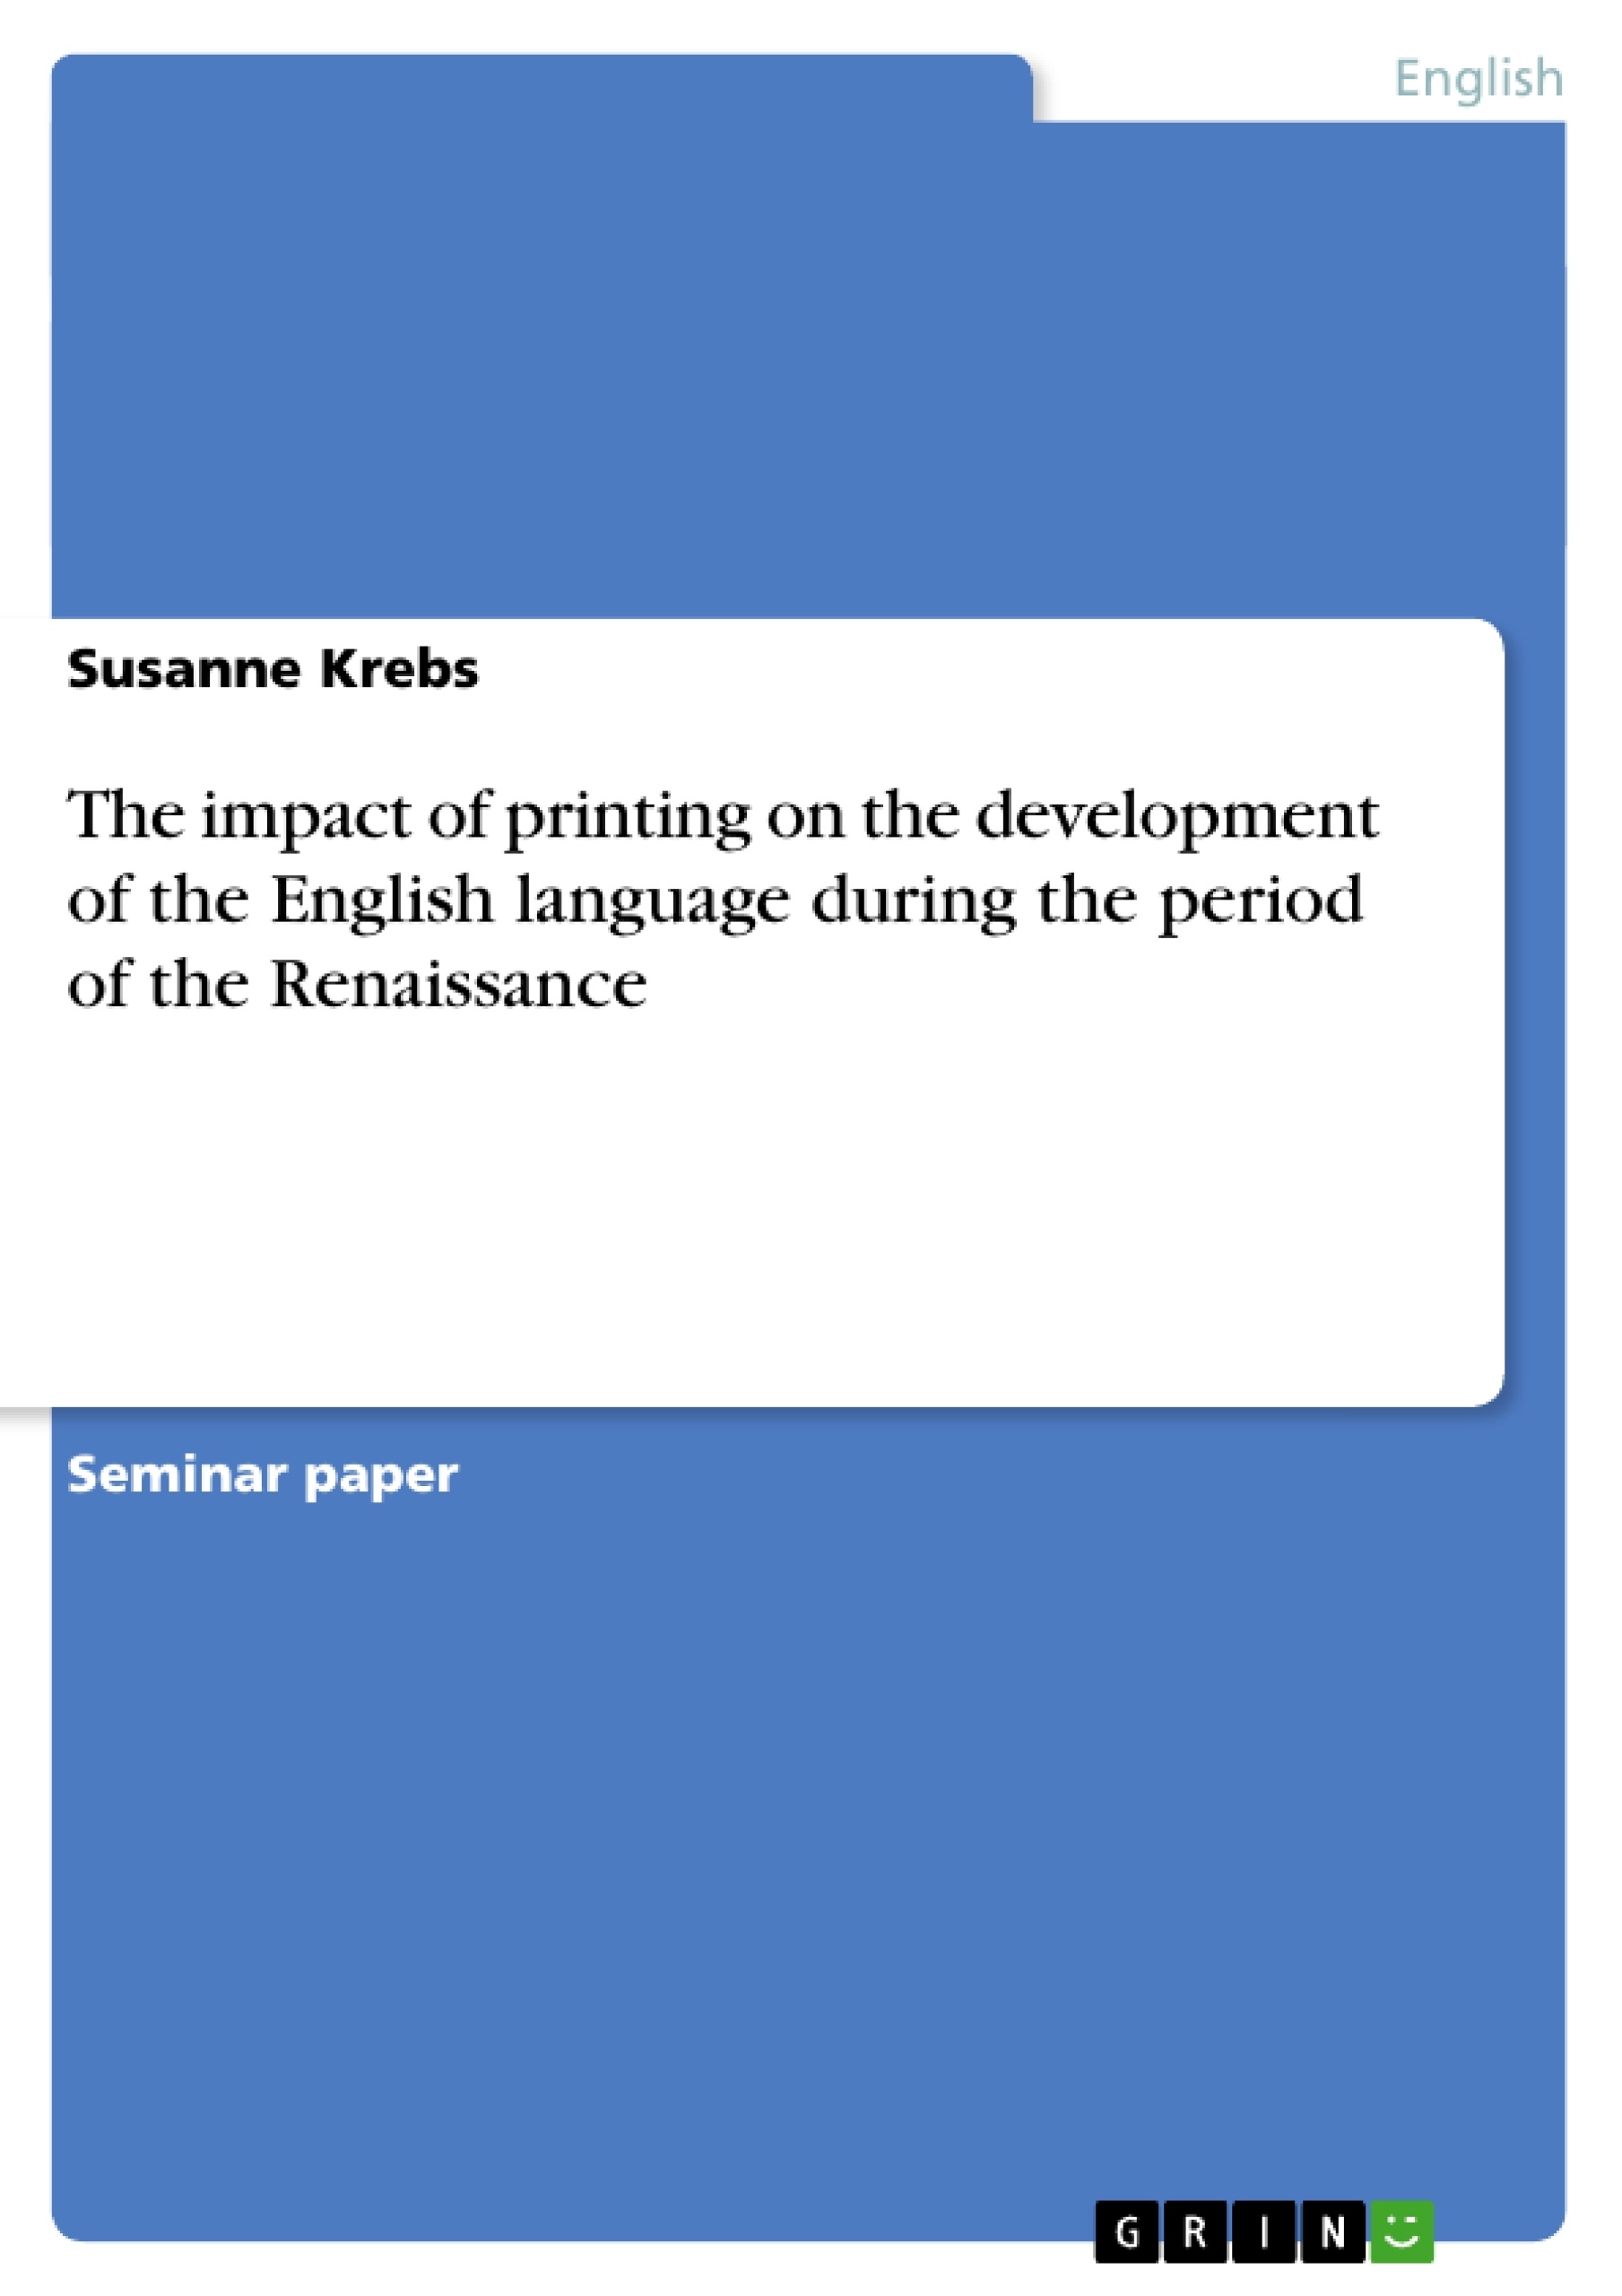 Title: The impact of printing on the development of the English language during the period of the Renaissance